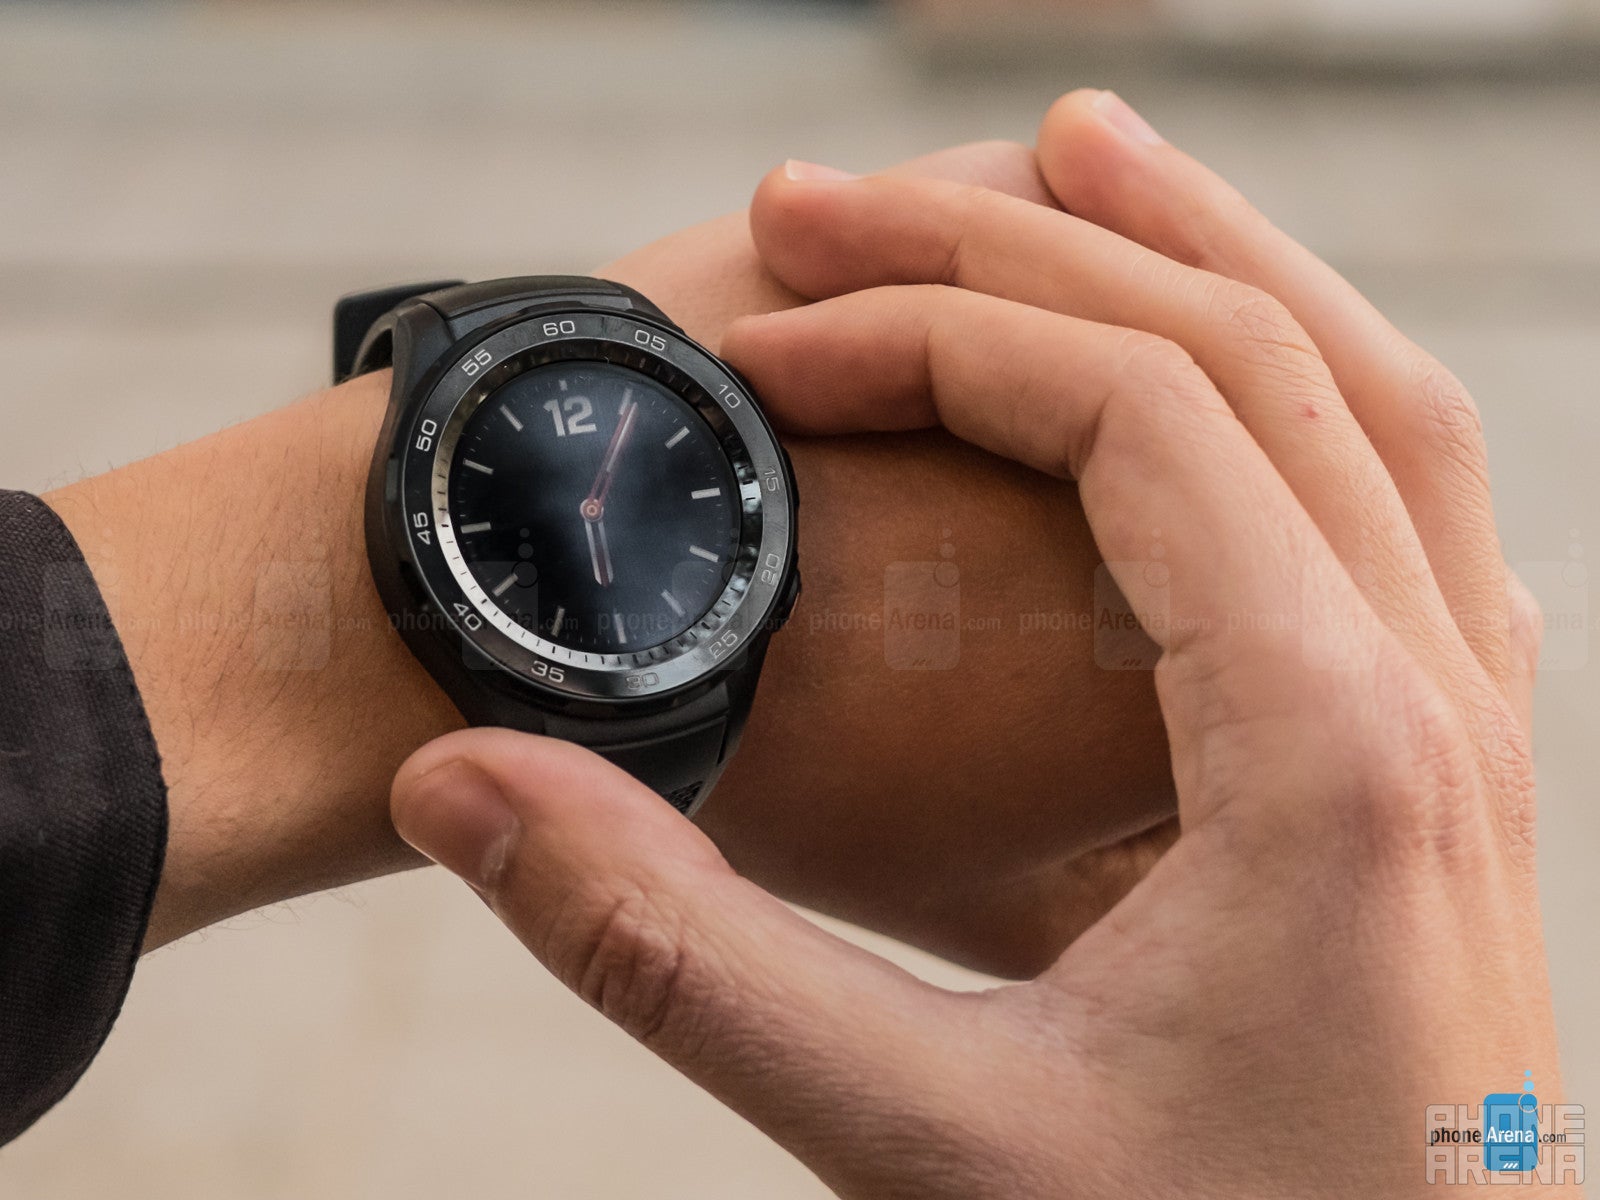 Huawei Watch 2 hands-on: My wrists are way too small for that